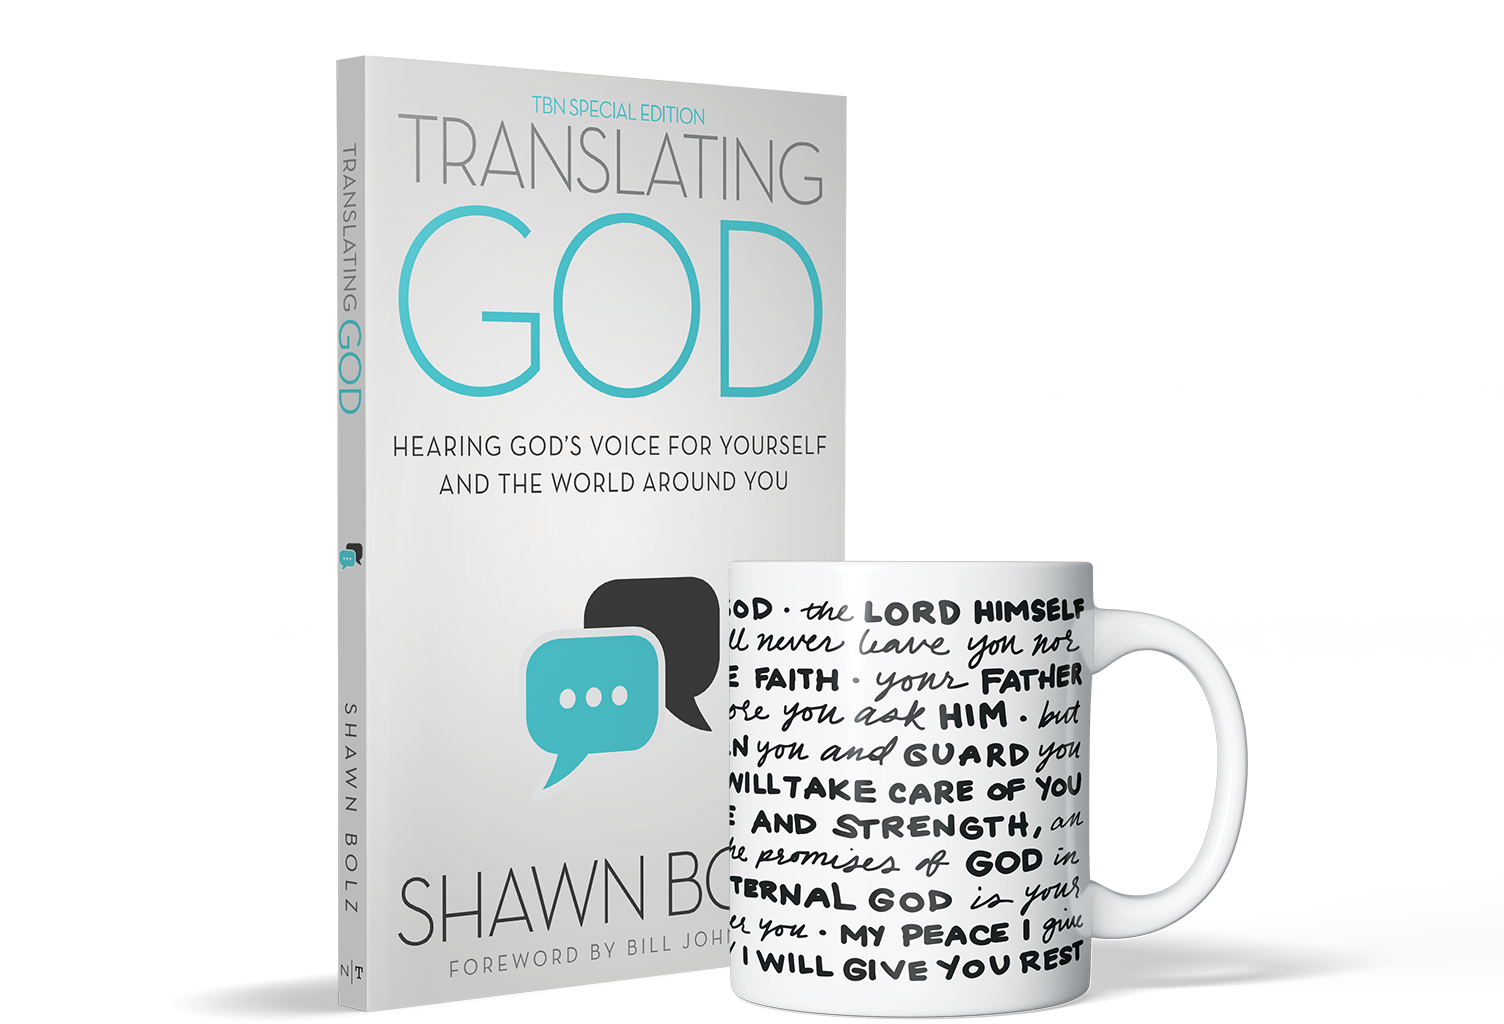 Receive Promises of God Mug and Translating God: Hearing God’s Voice for Yourself and the World Around You, by Shawn Bolz from TBN